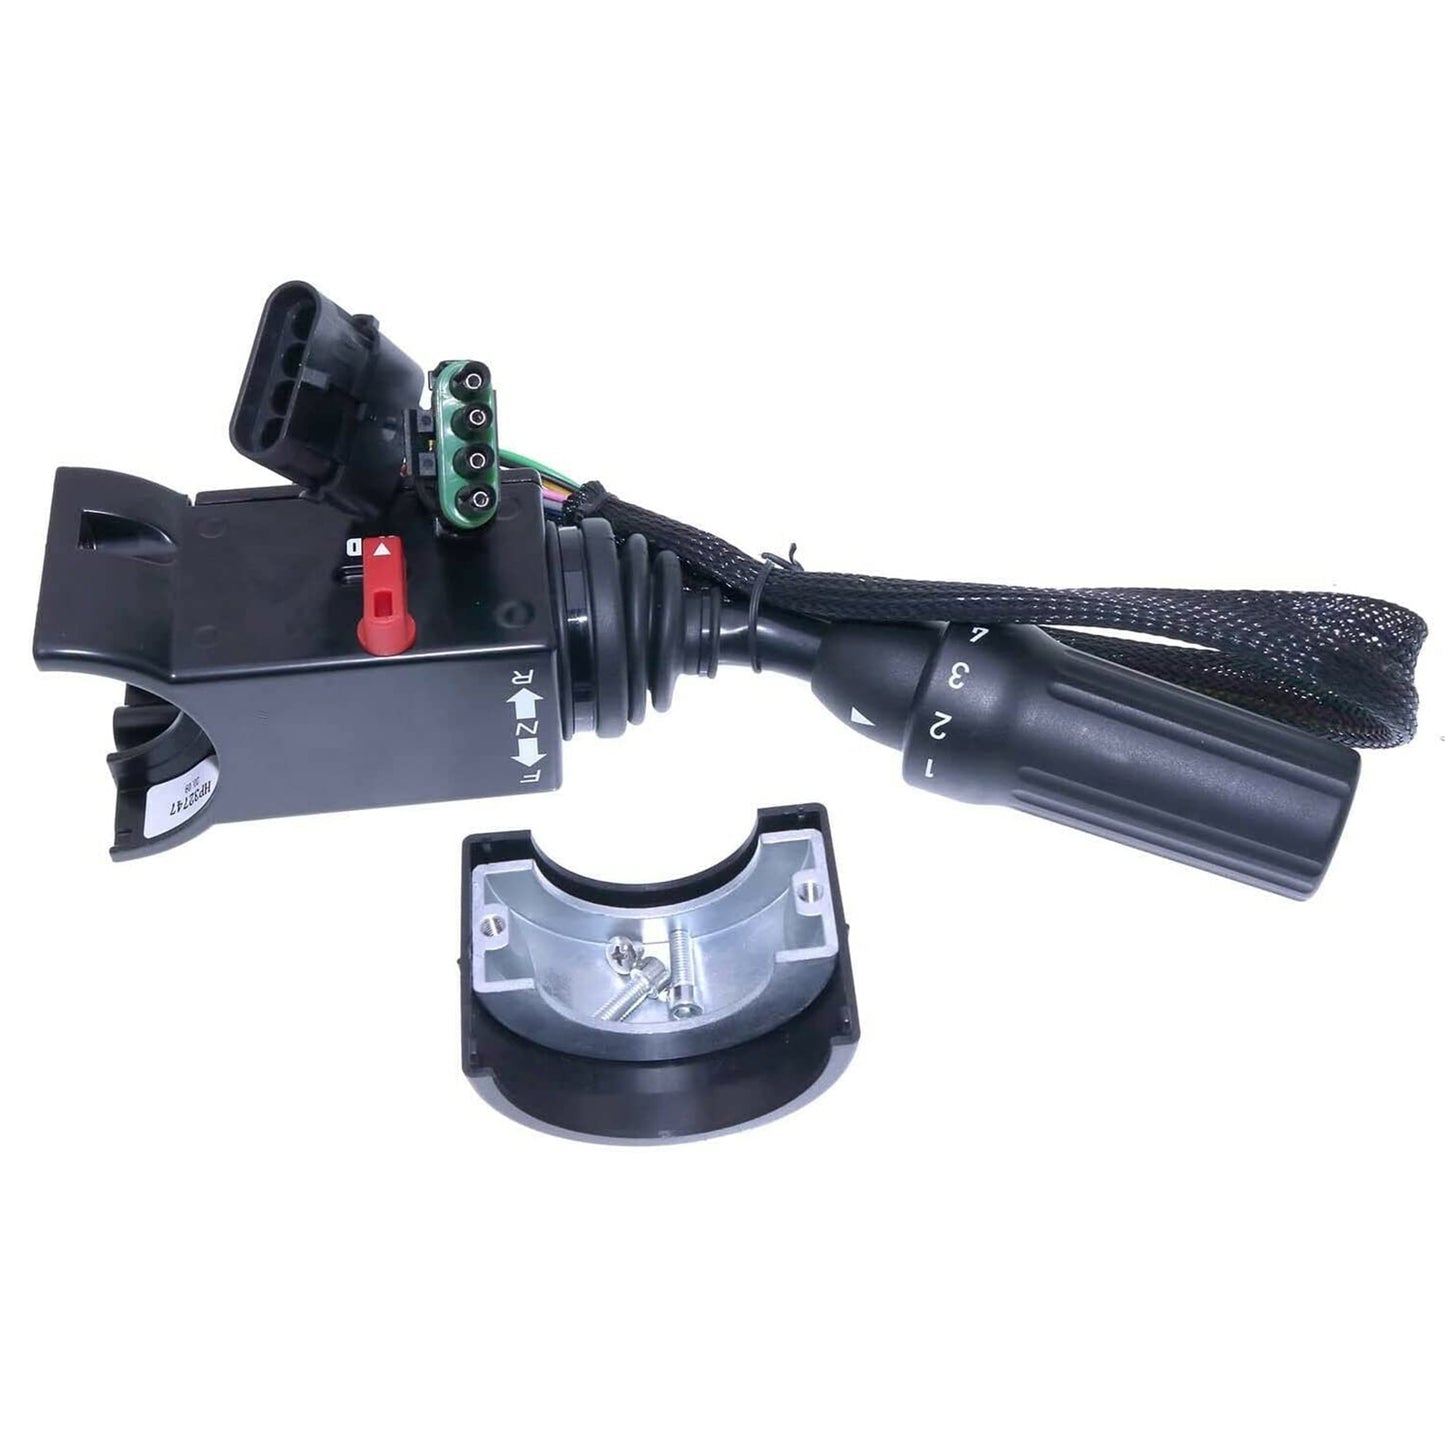 0265014 Transmission Shifter Compatible With JLG 35367A Lull 10135367 8K-42 S/N101-273